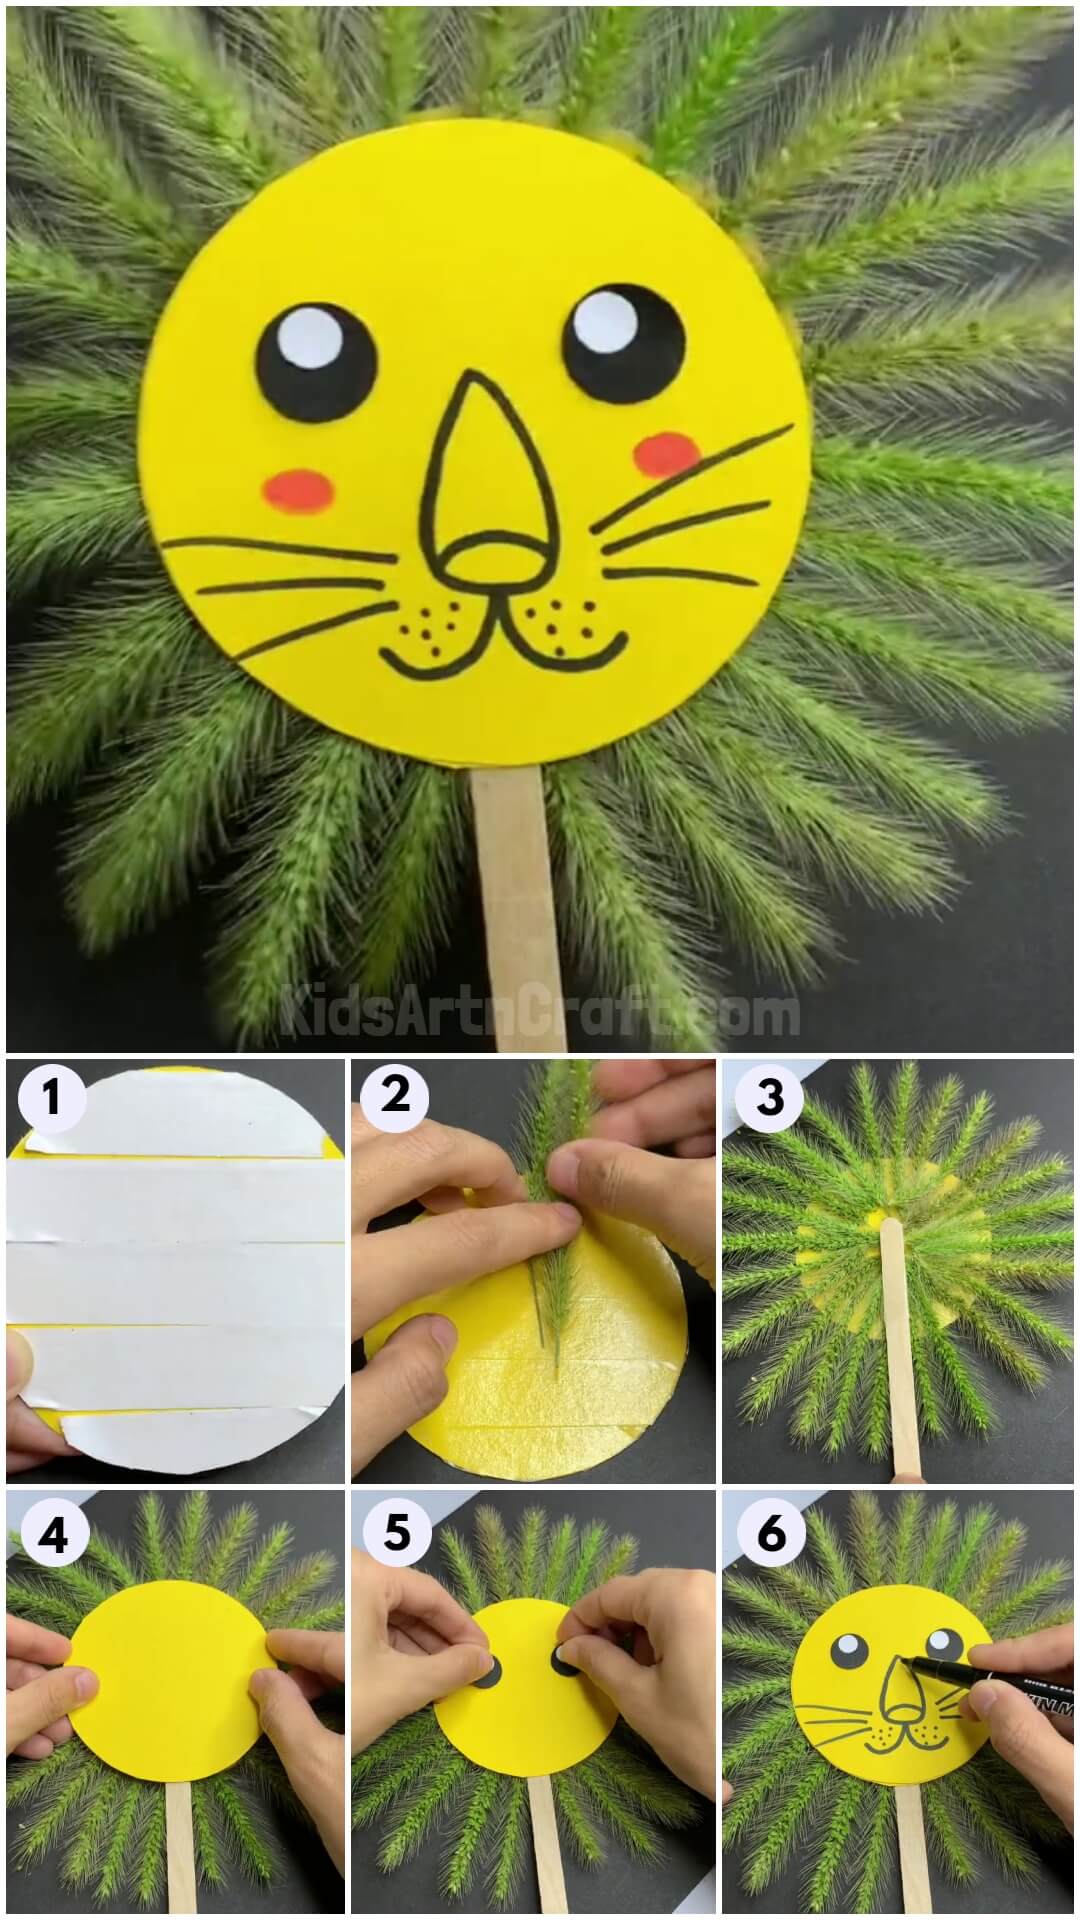 Fun Ear of Wheat Lion Craft and Activities For Kids